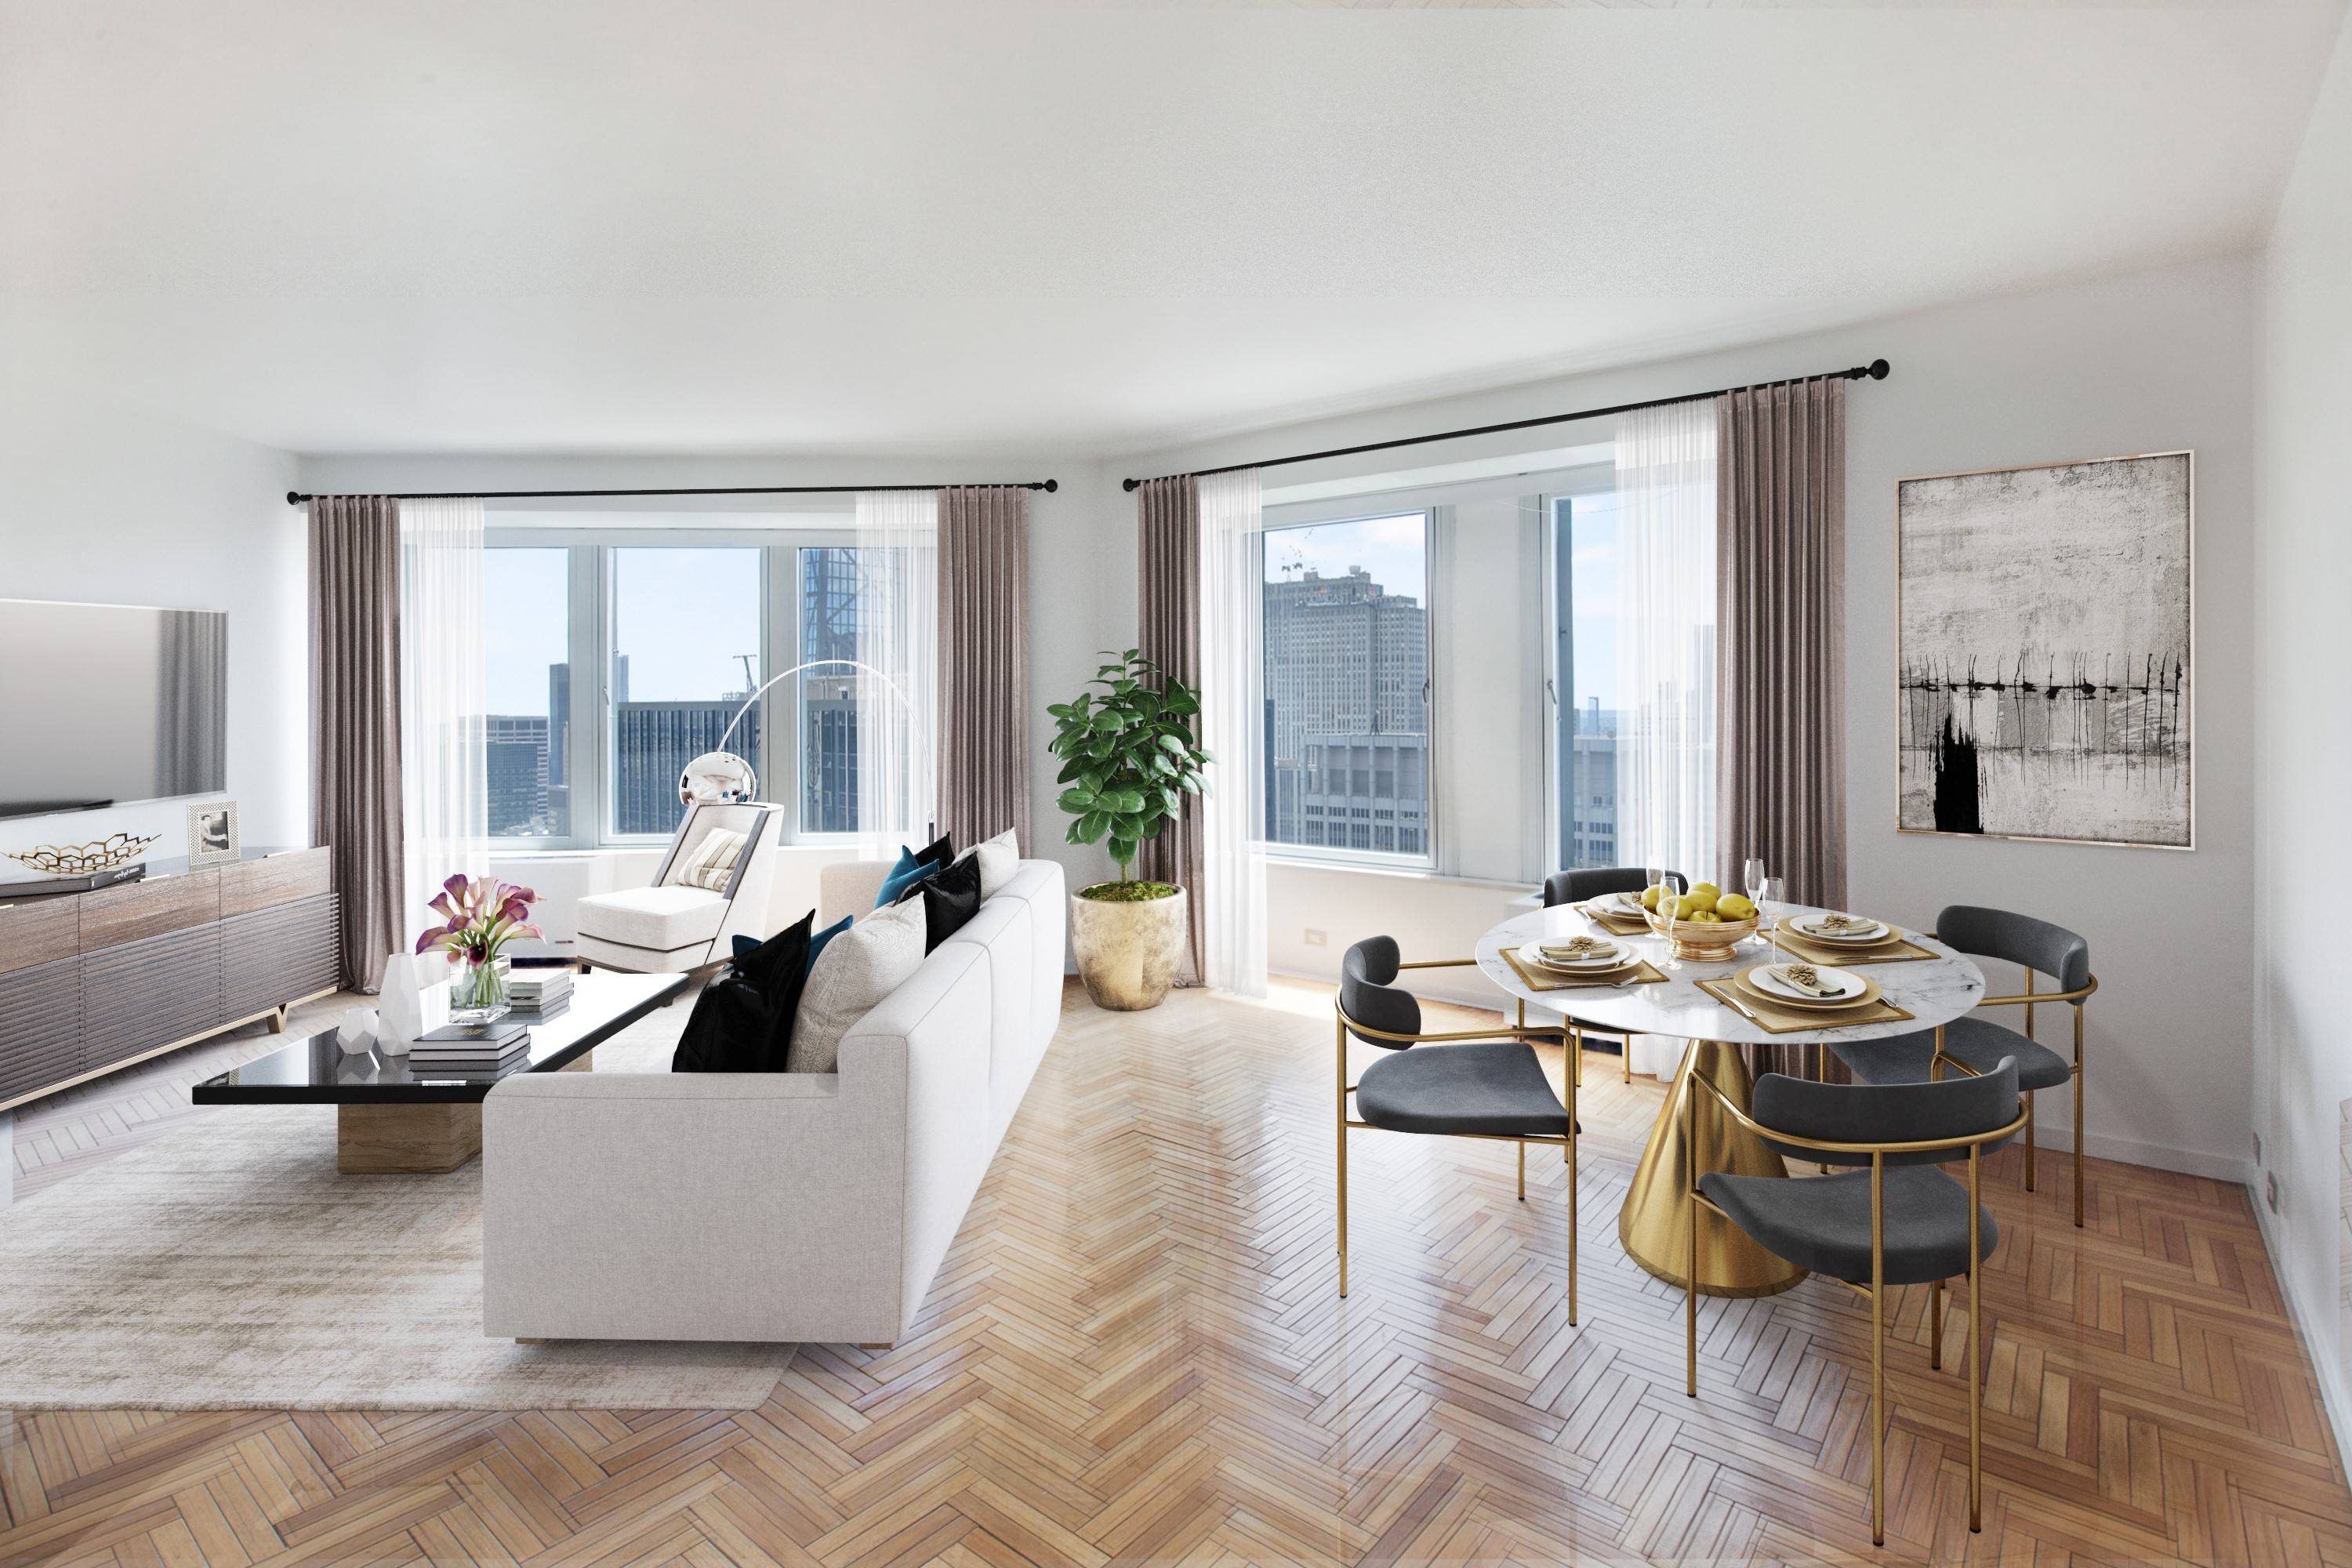 New To The Market!!! Luxury 2 Bedroom 2.5 Bath with Spectacular City and Water Views In The Heart of Manhattan.